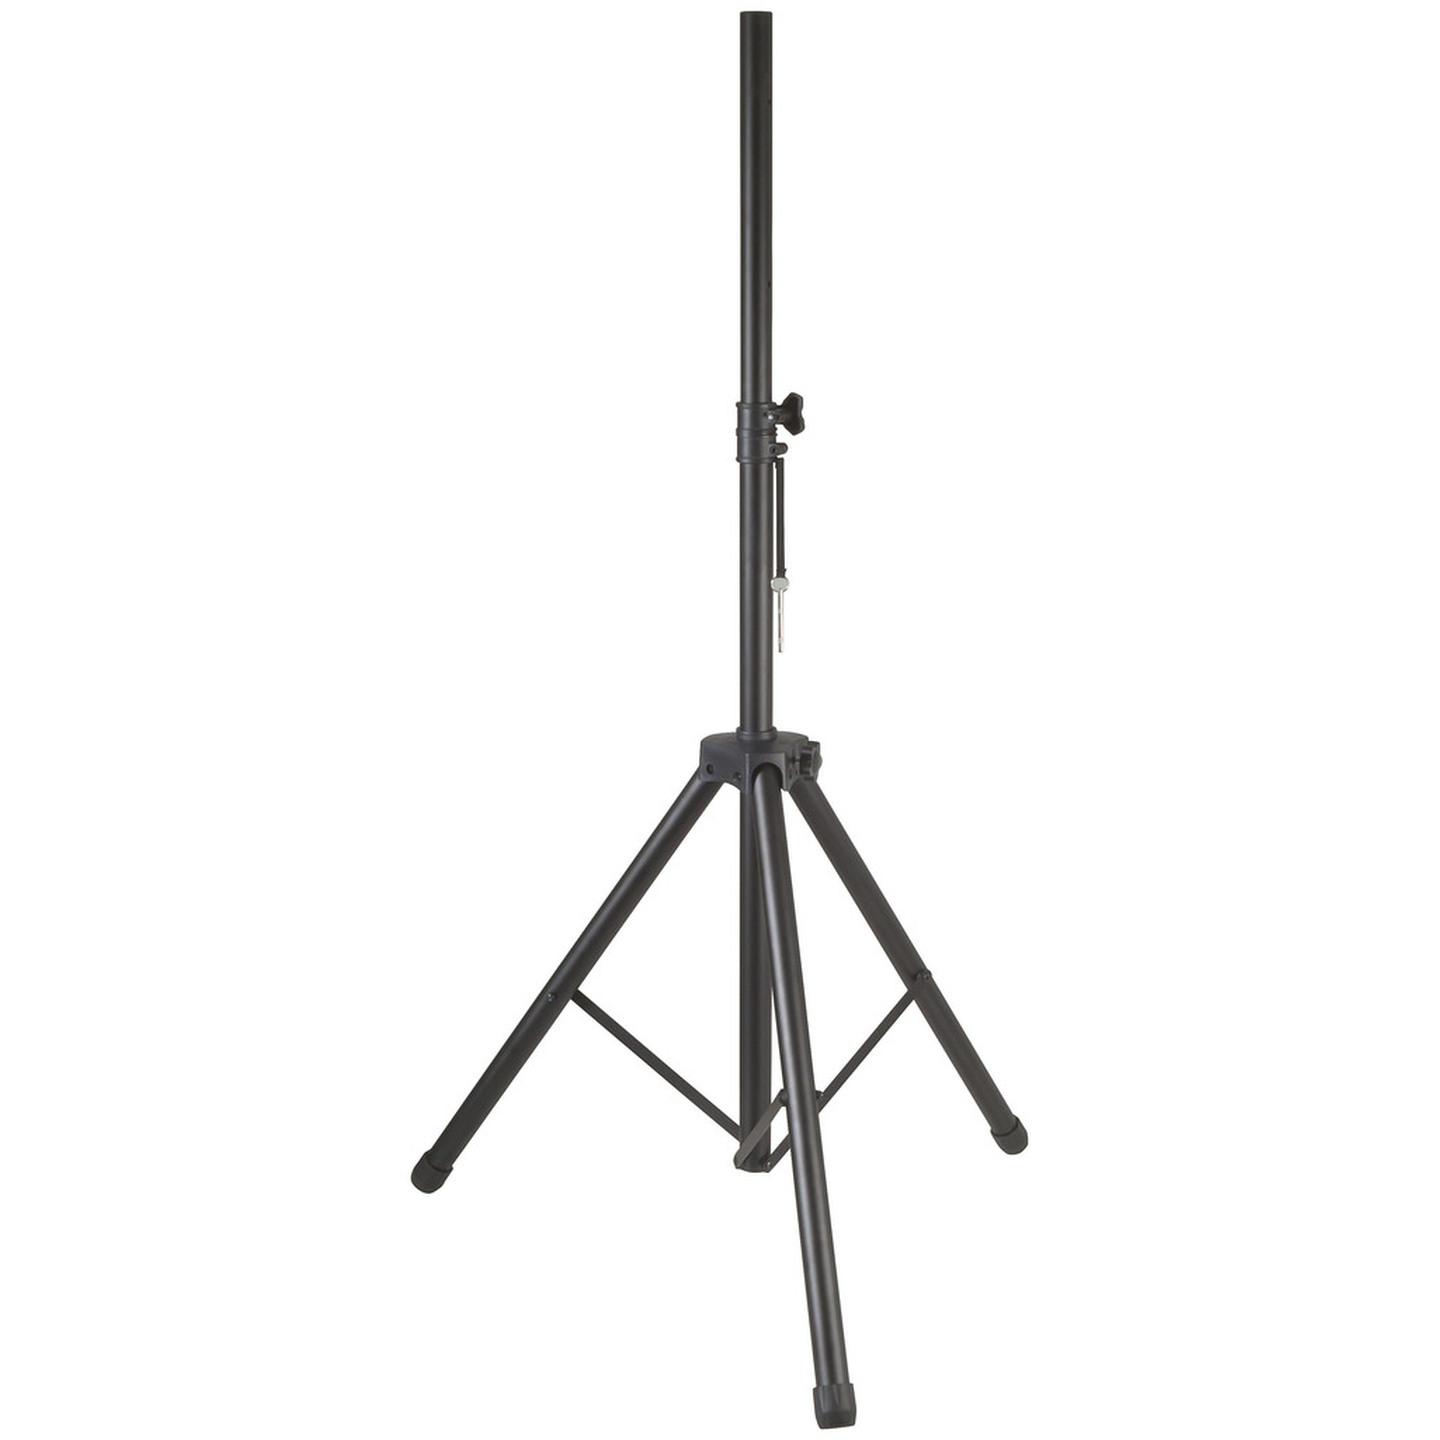 Large PA Speaker Stand